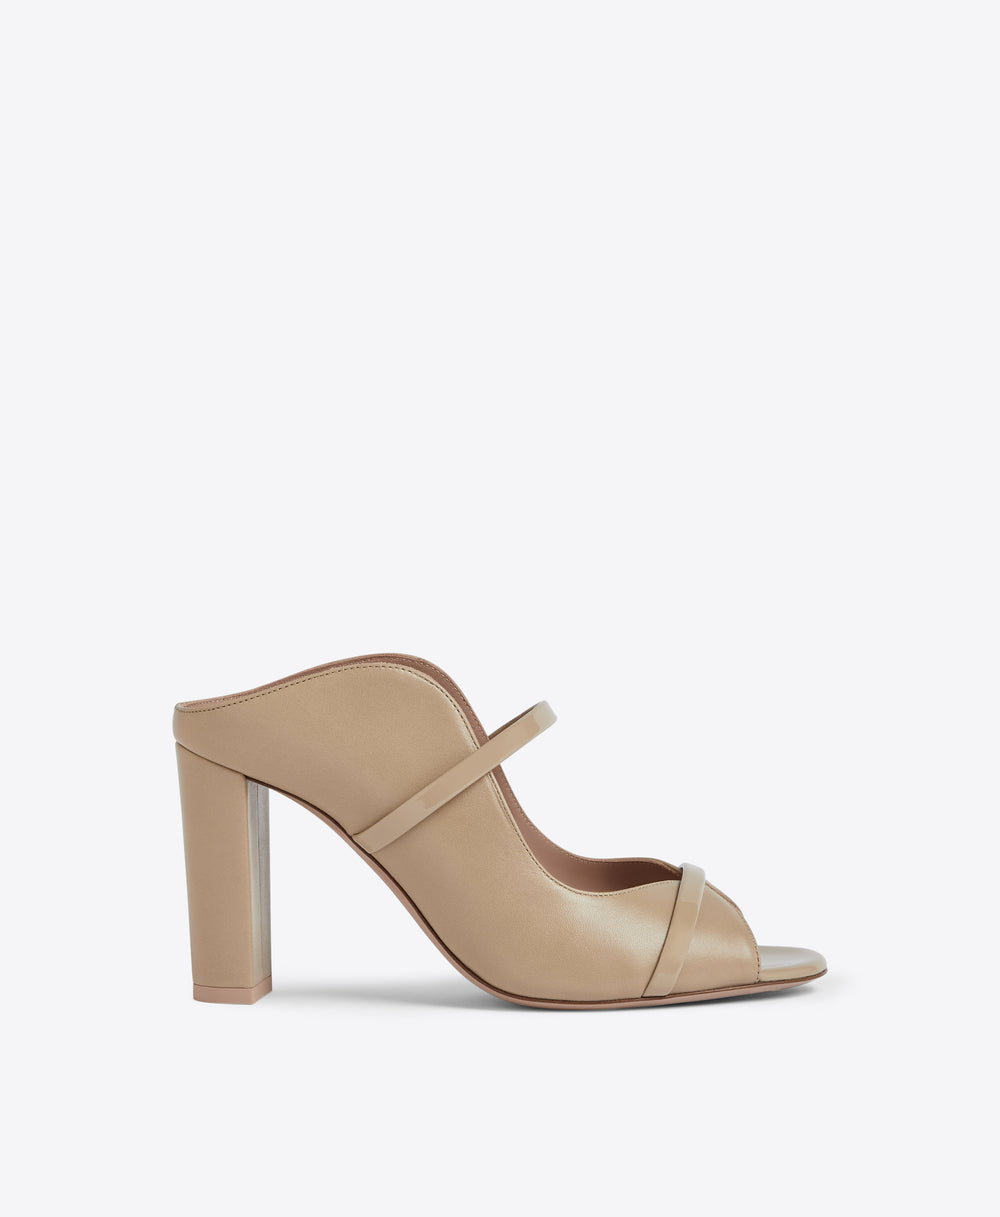 Malone Souliers Norah 85 Camel Leather Heeled Sandals